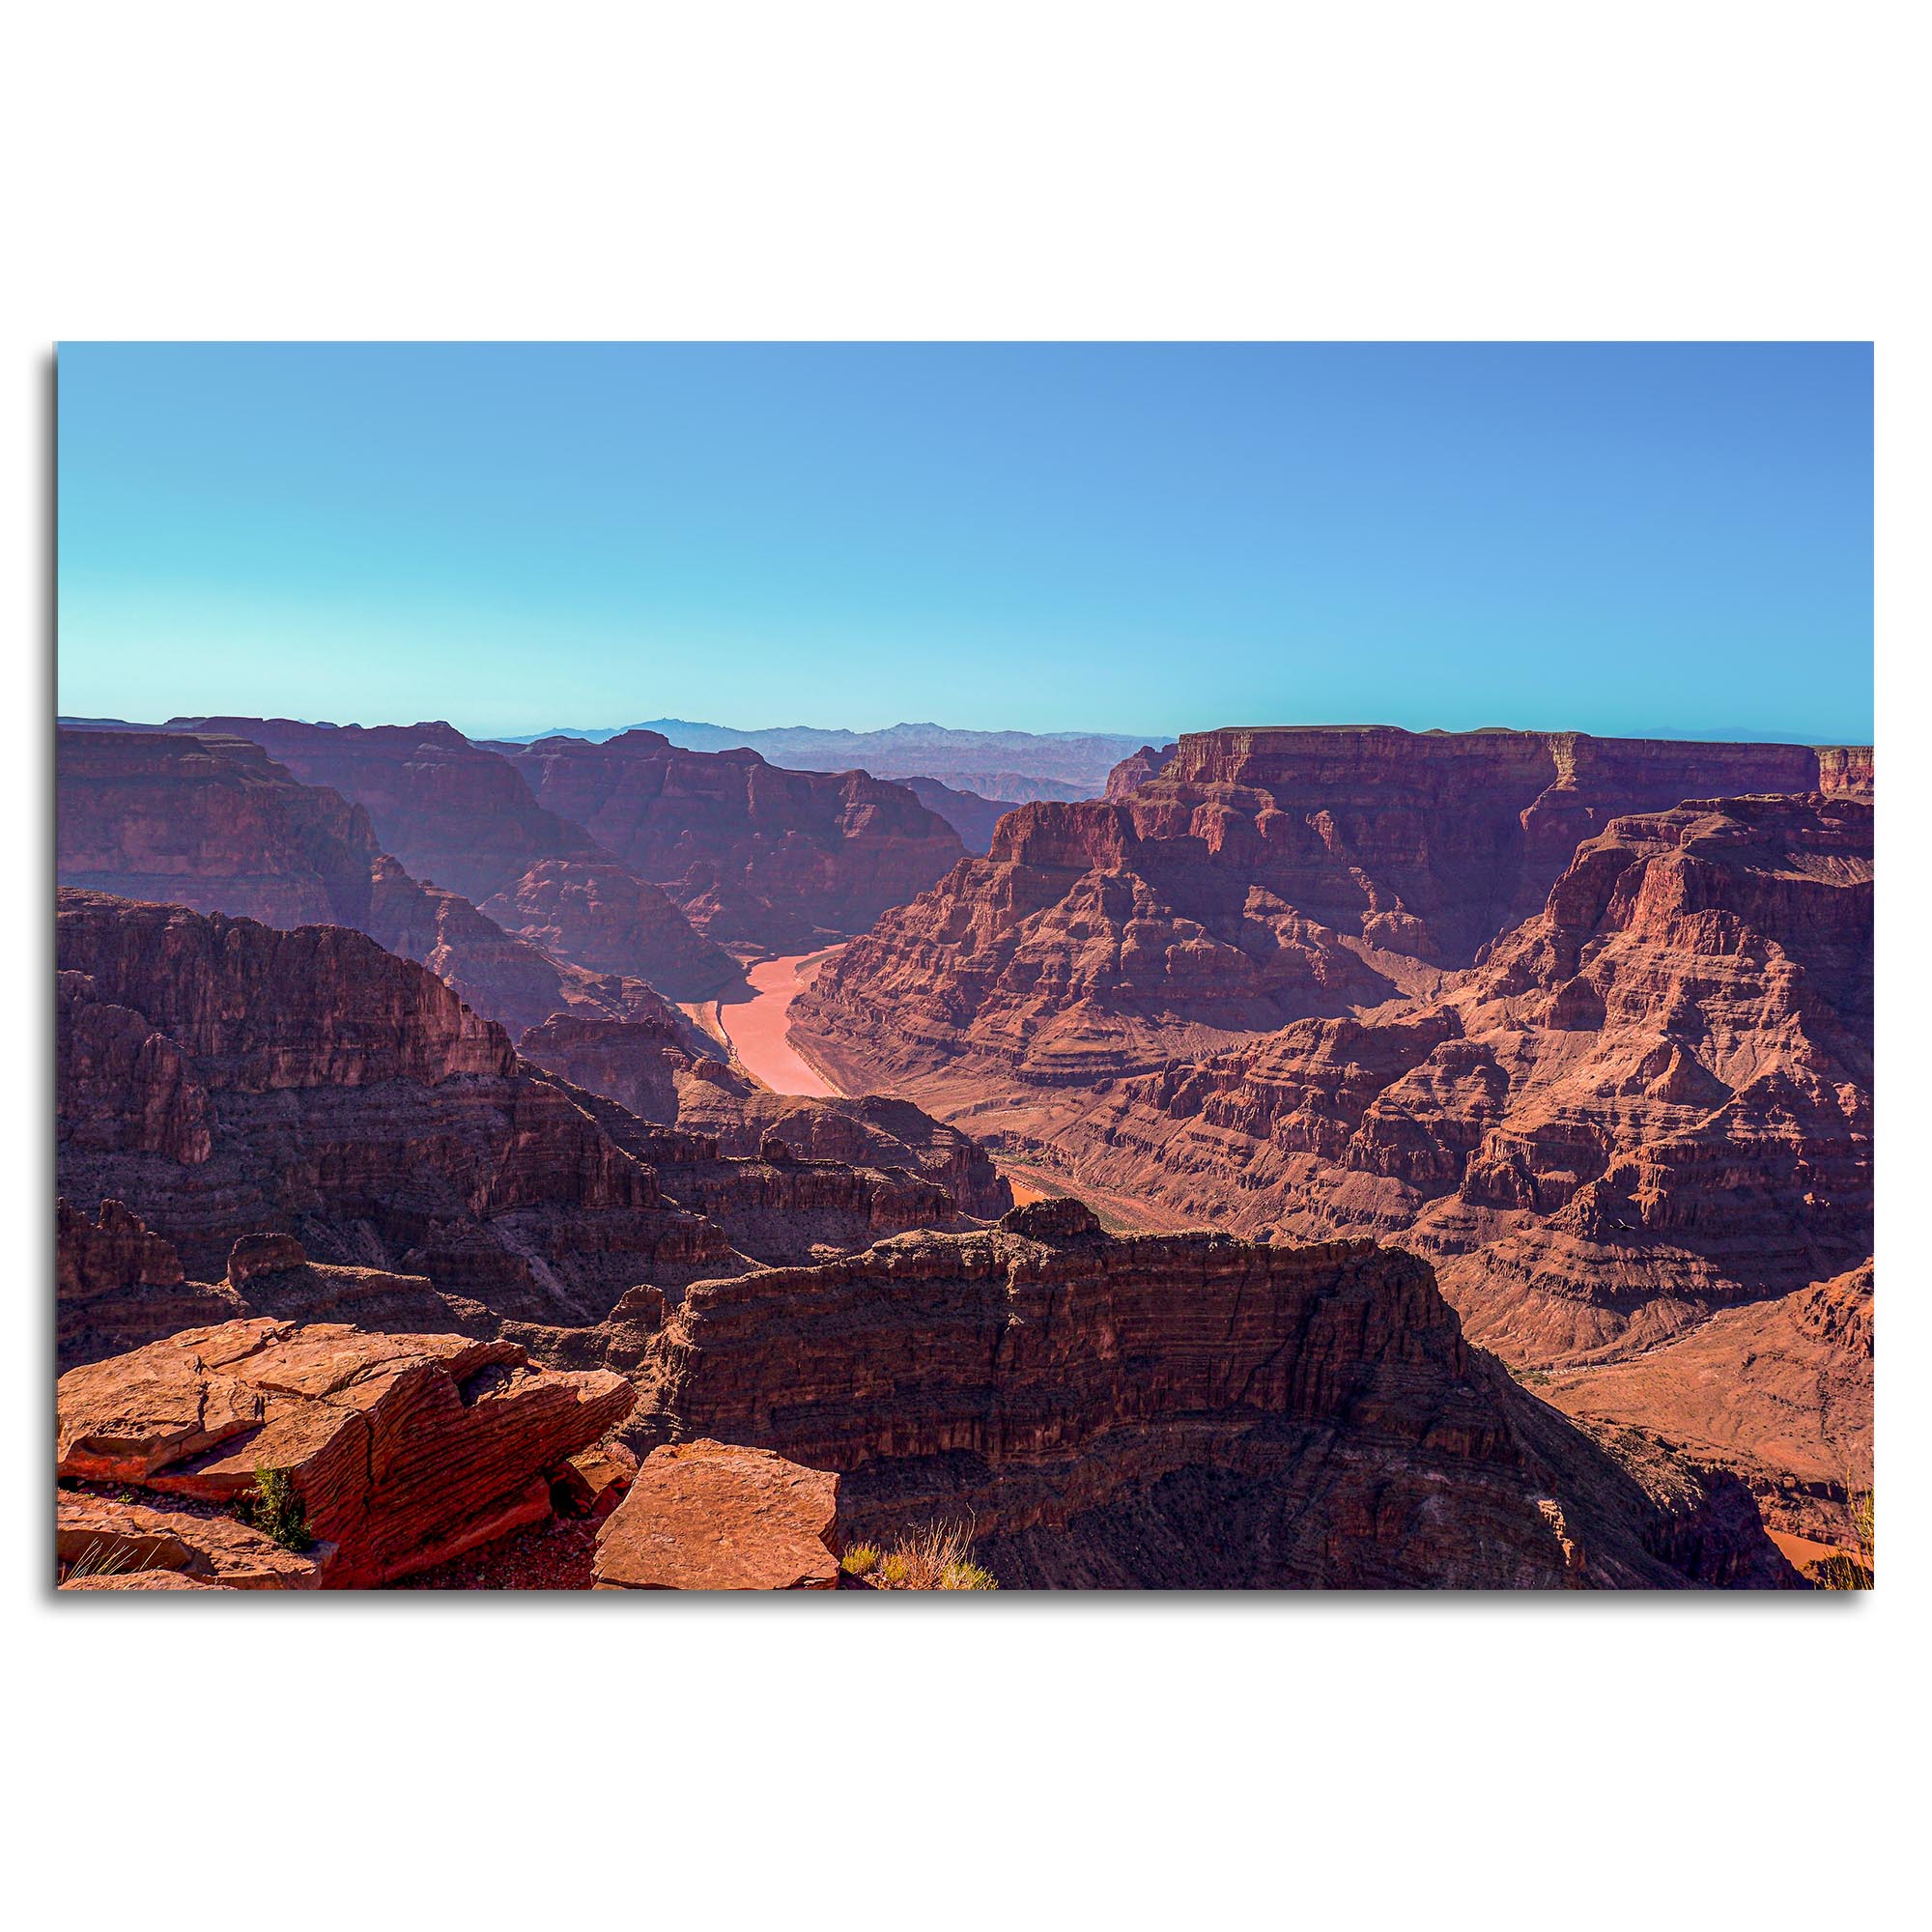 Adam Utz 'Grand Canyon in Red' 32in x 22in Contemporary Style Desert Art